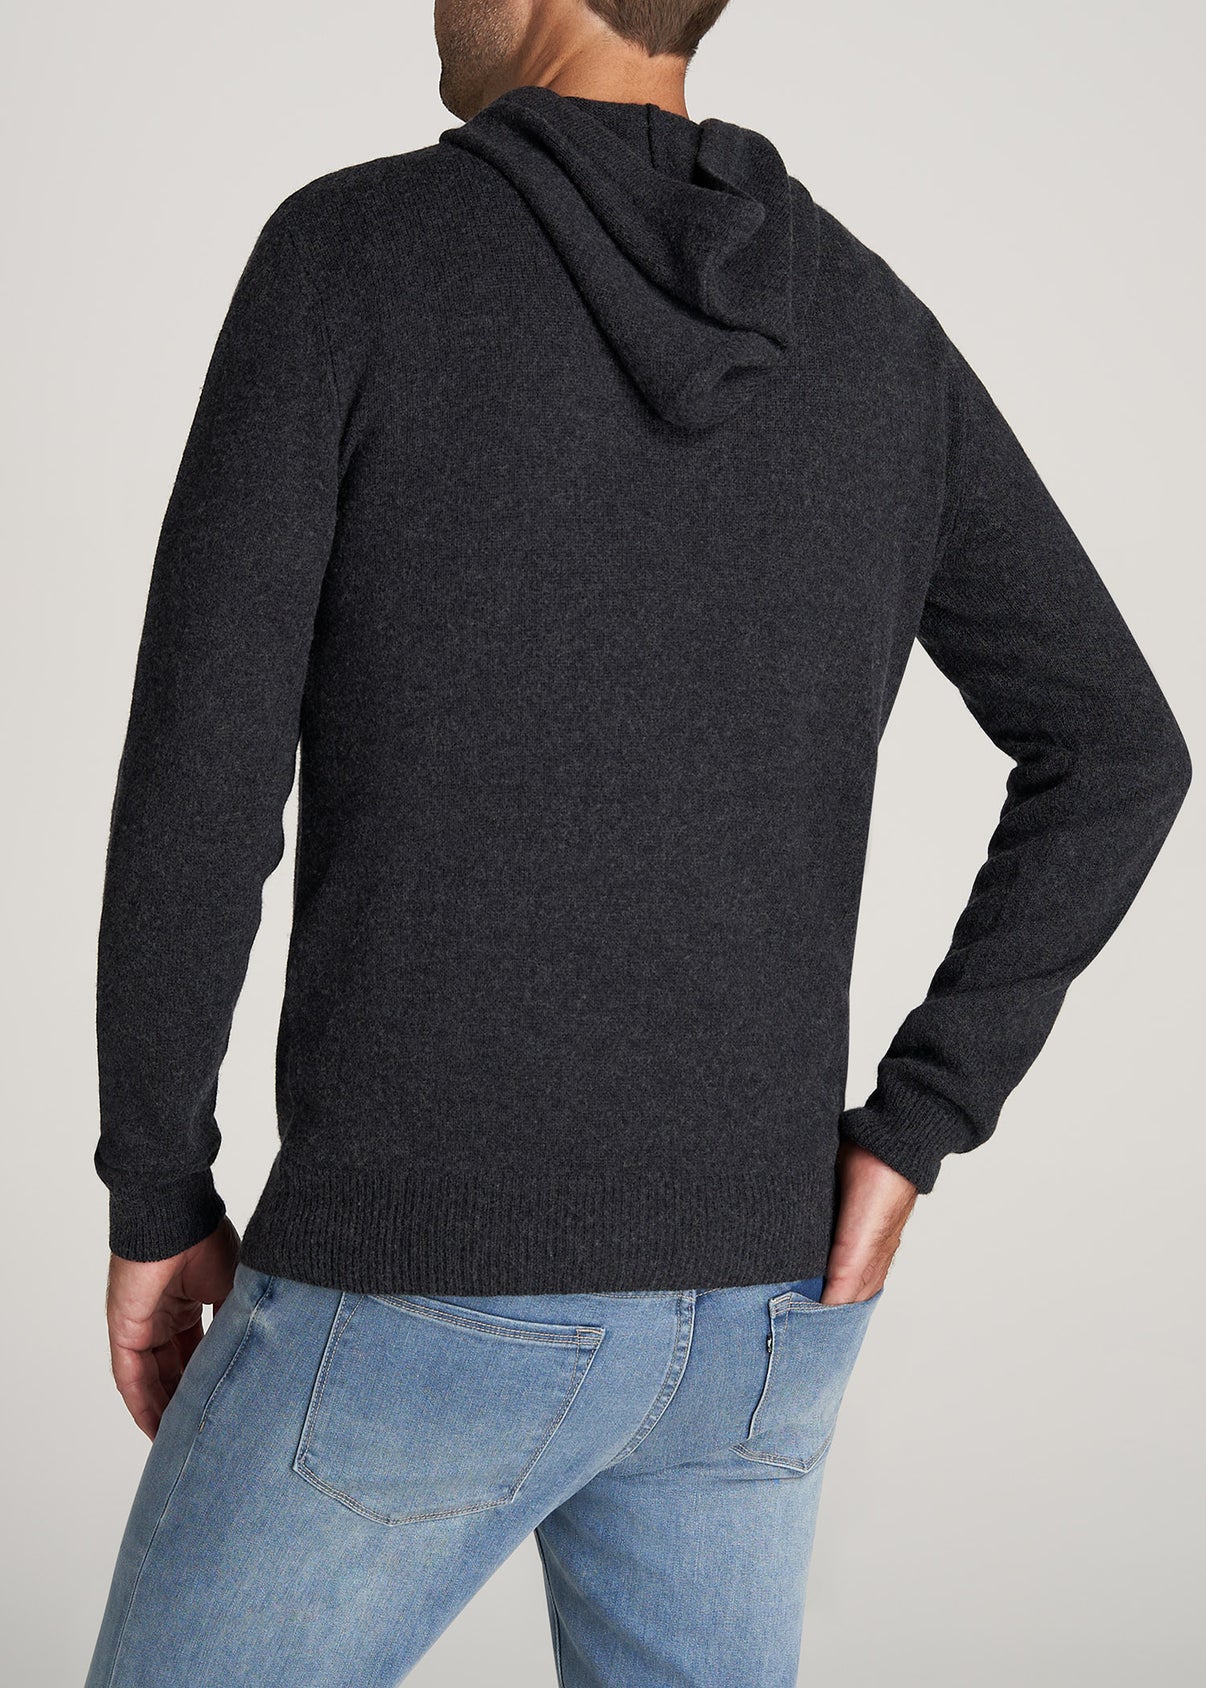 Men's Tall Hooded Sweater Merino in Charcoal | American Tall